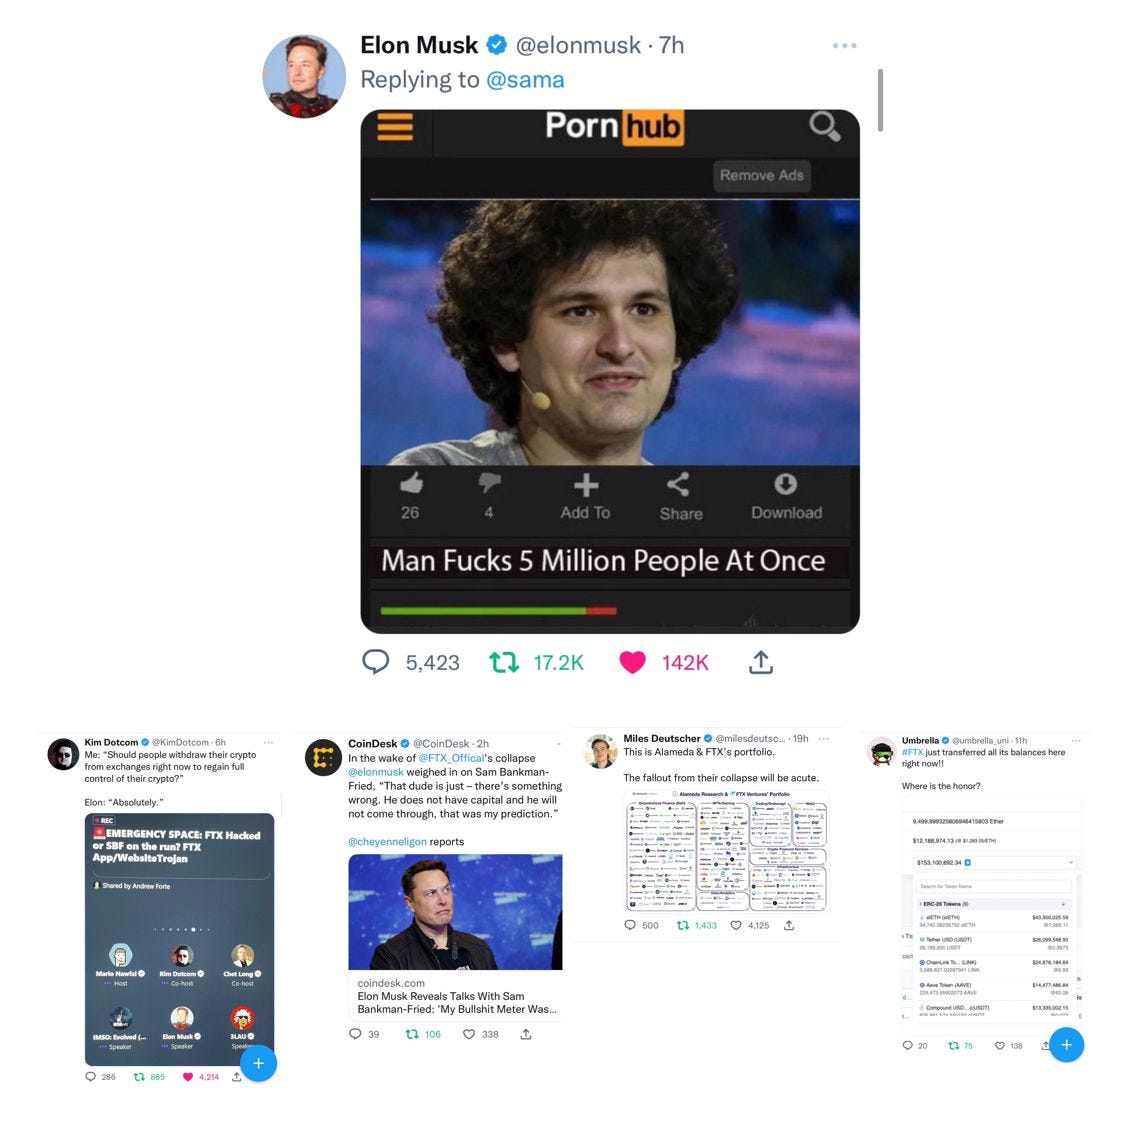 screenshots of selected retweets from the last few hours on Elon Musk's Twitter